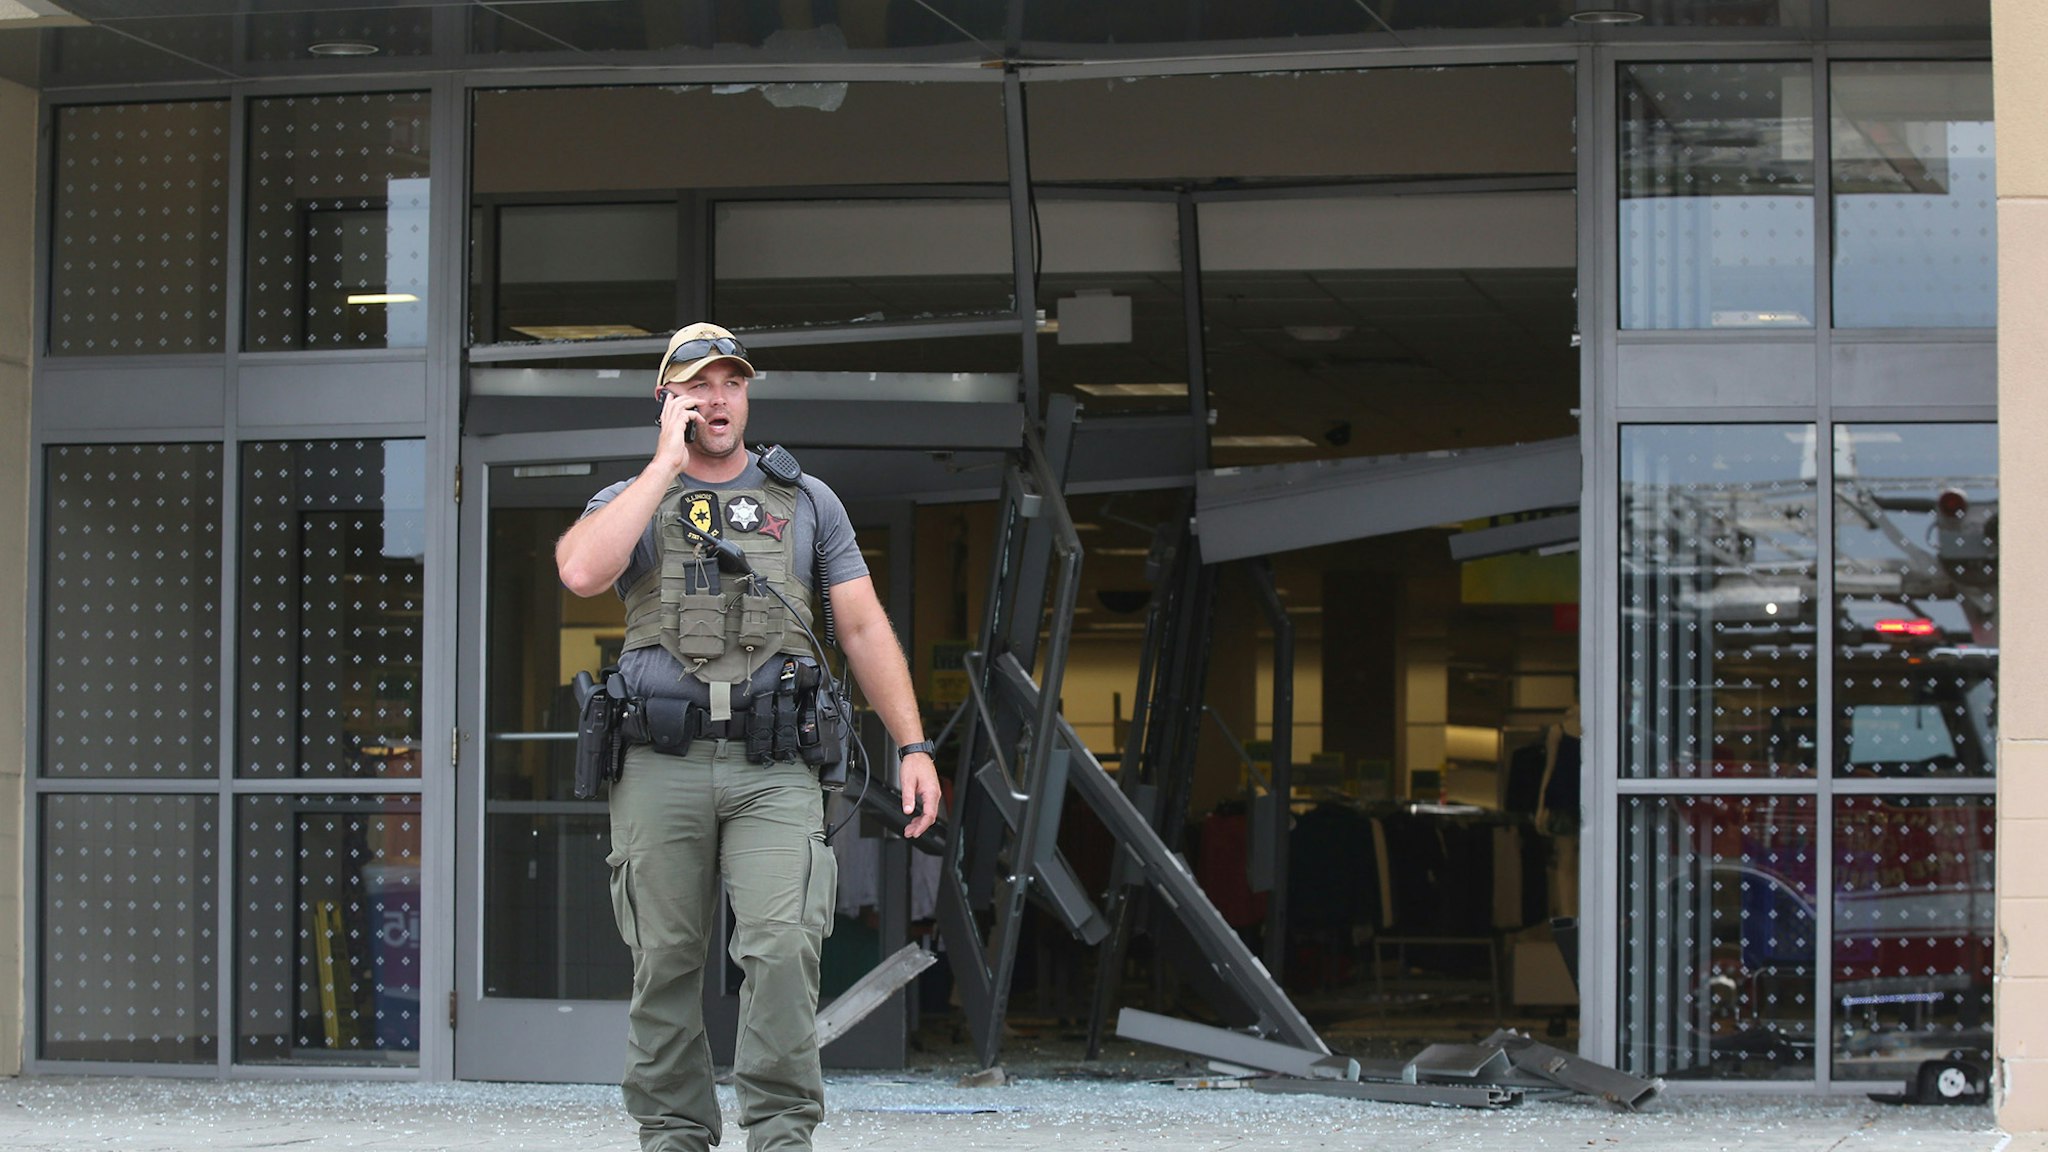 A state police officer stands outside of a Woodfield Mall entrance on Friday, Sept. 20, 2019, in Schaumberg, Ill. A vehicle drove into the mall on Friday through one of the Sears' entrances.